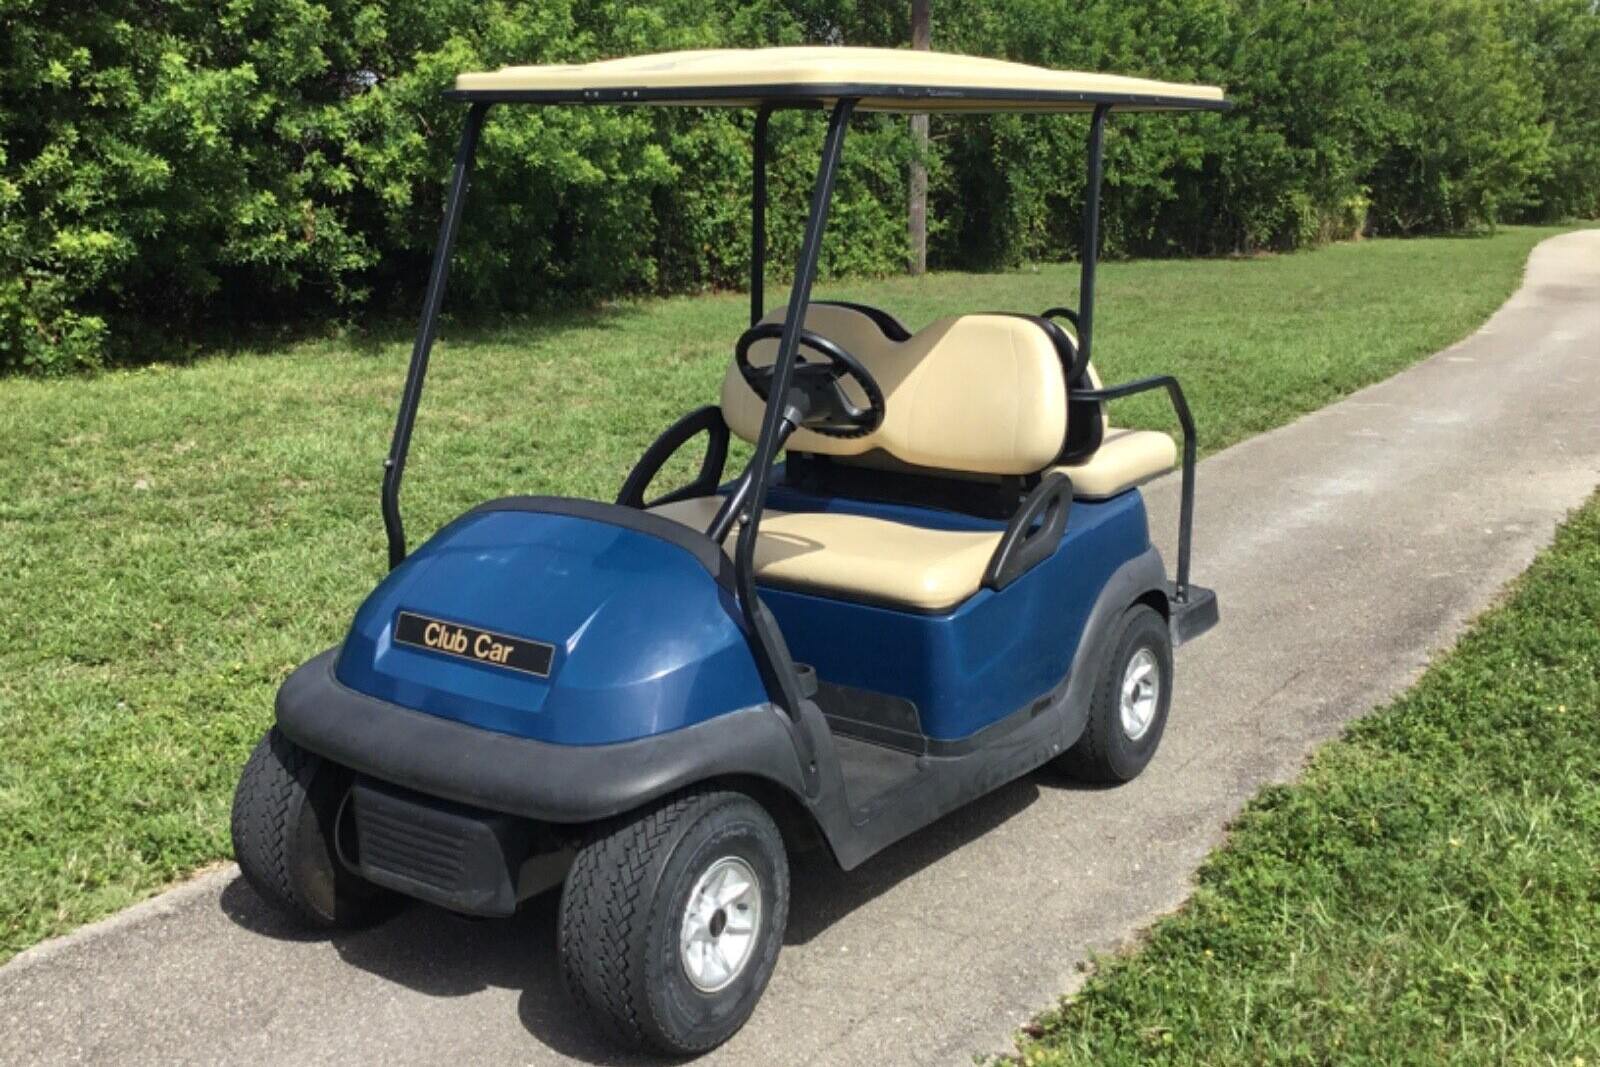 Golf cart accessible for use during your stay in season (waiver must be signed)